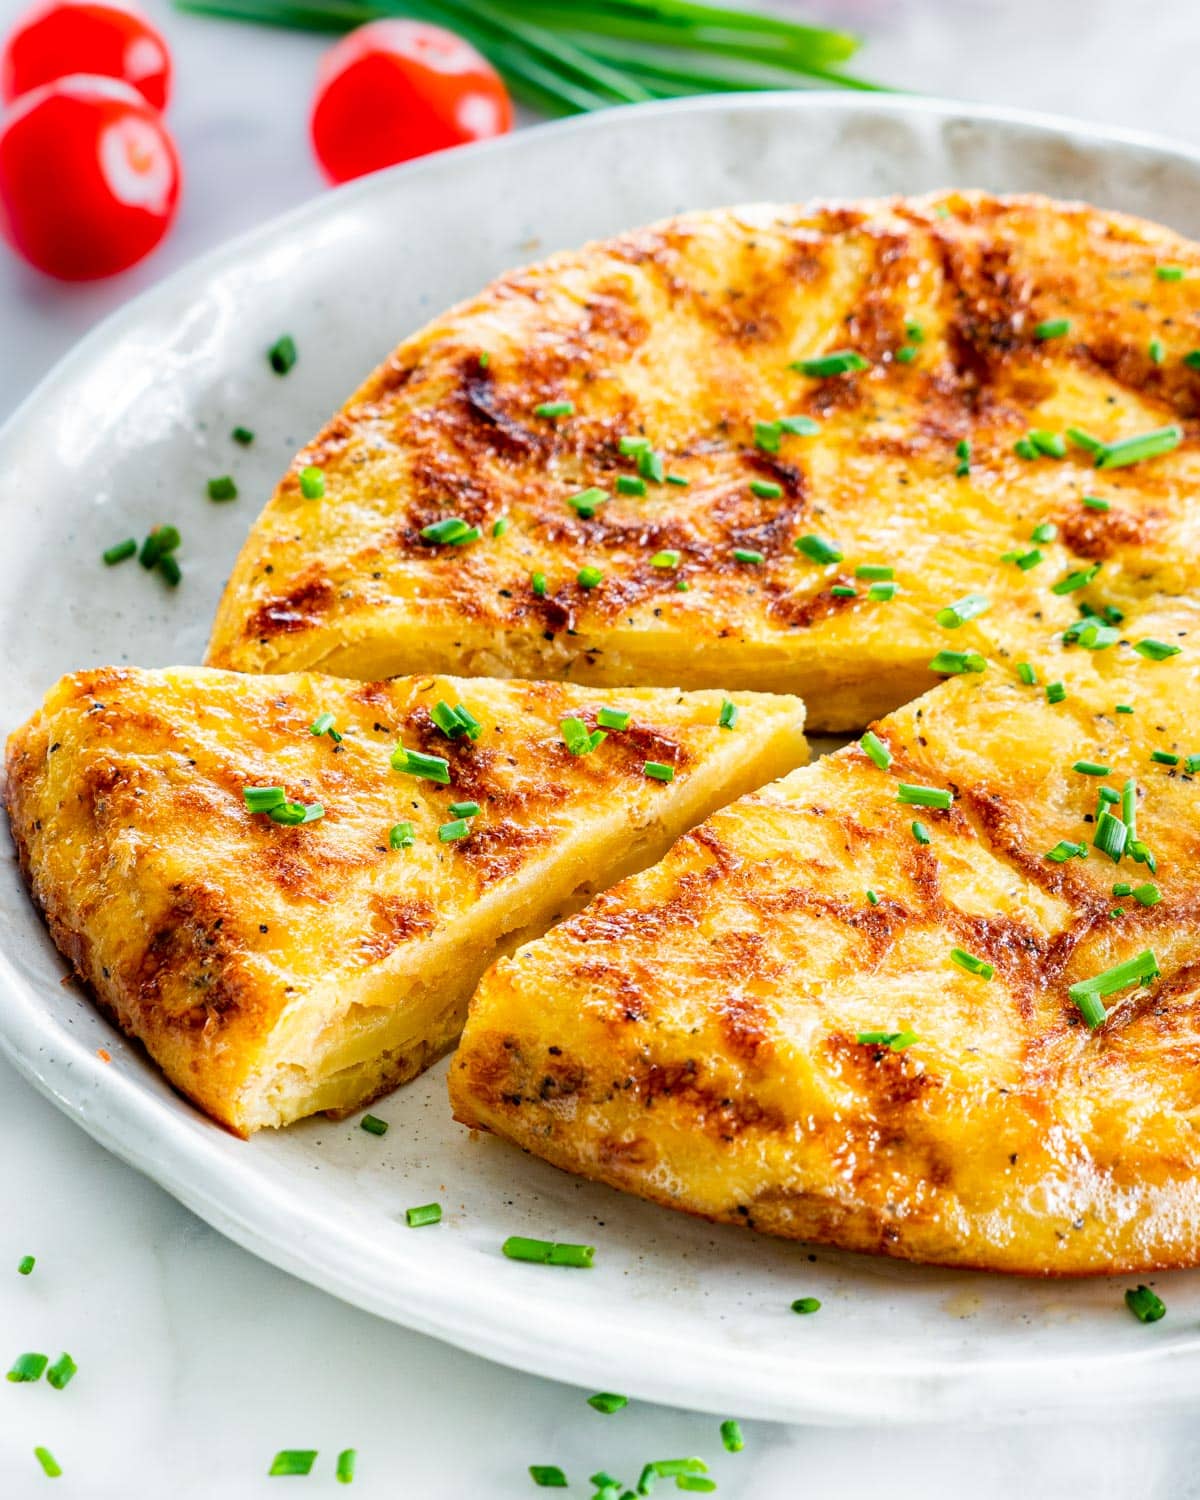 Side view of Spanish tortilla on a plate with one slice cut out and garnished with chives